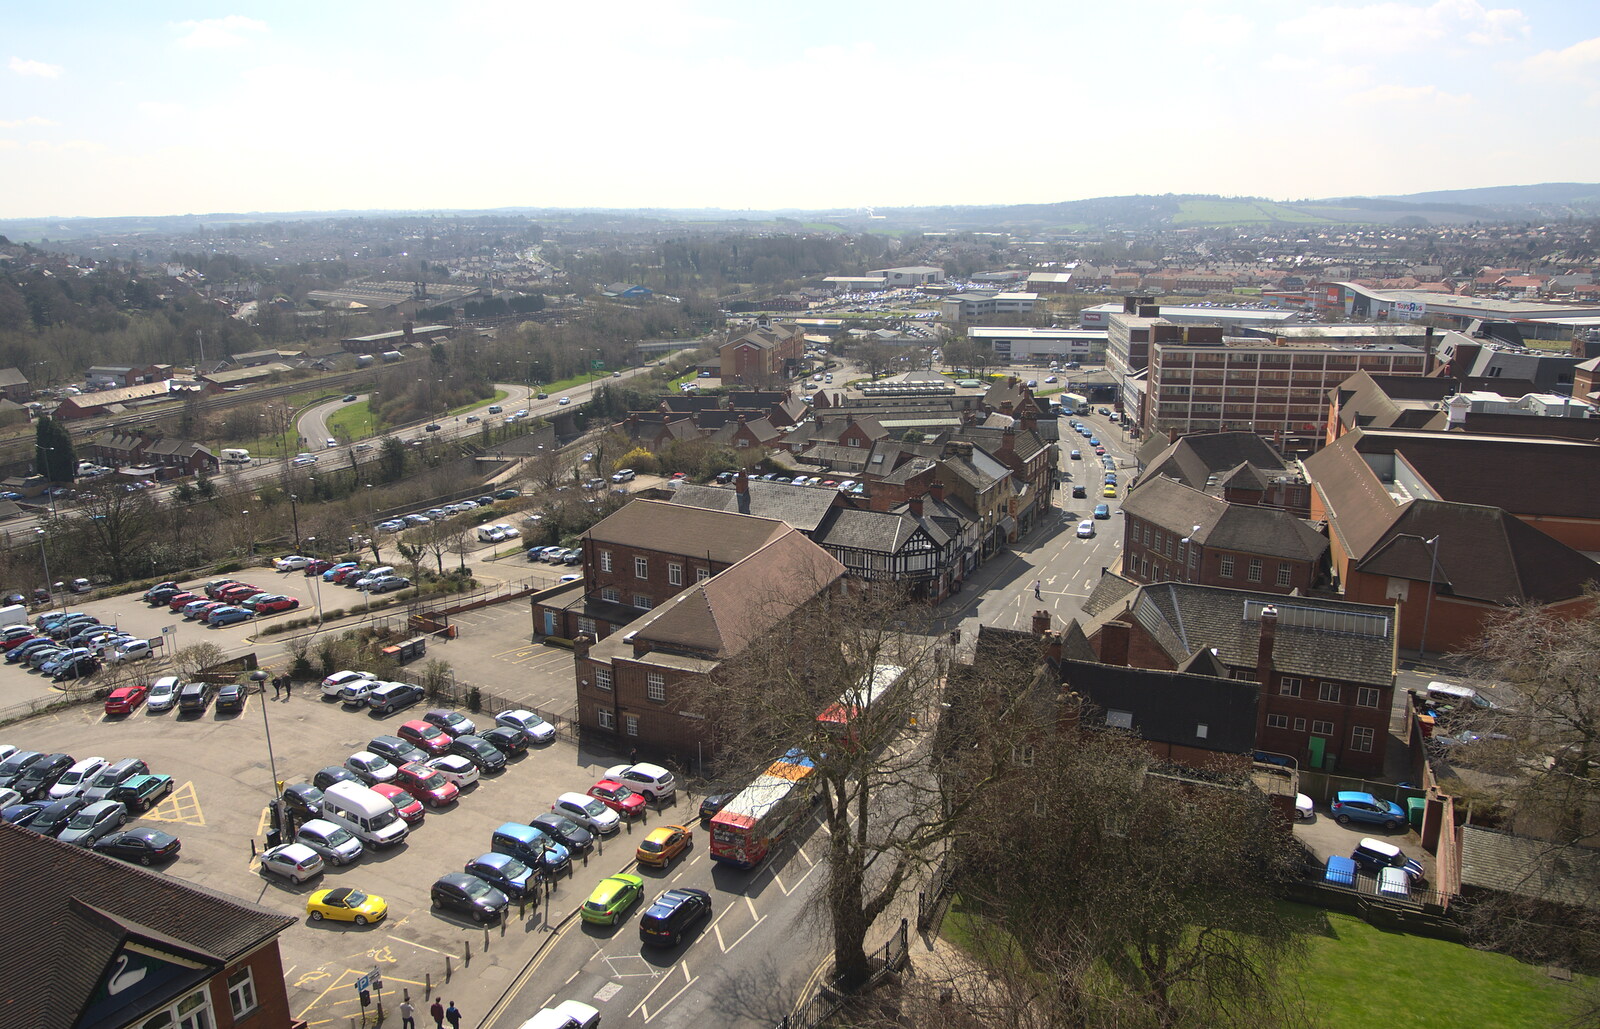 A view over Chesterfield from Chesterfield and the Twisty Spire, Derbyshire - 19th April 2013